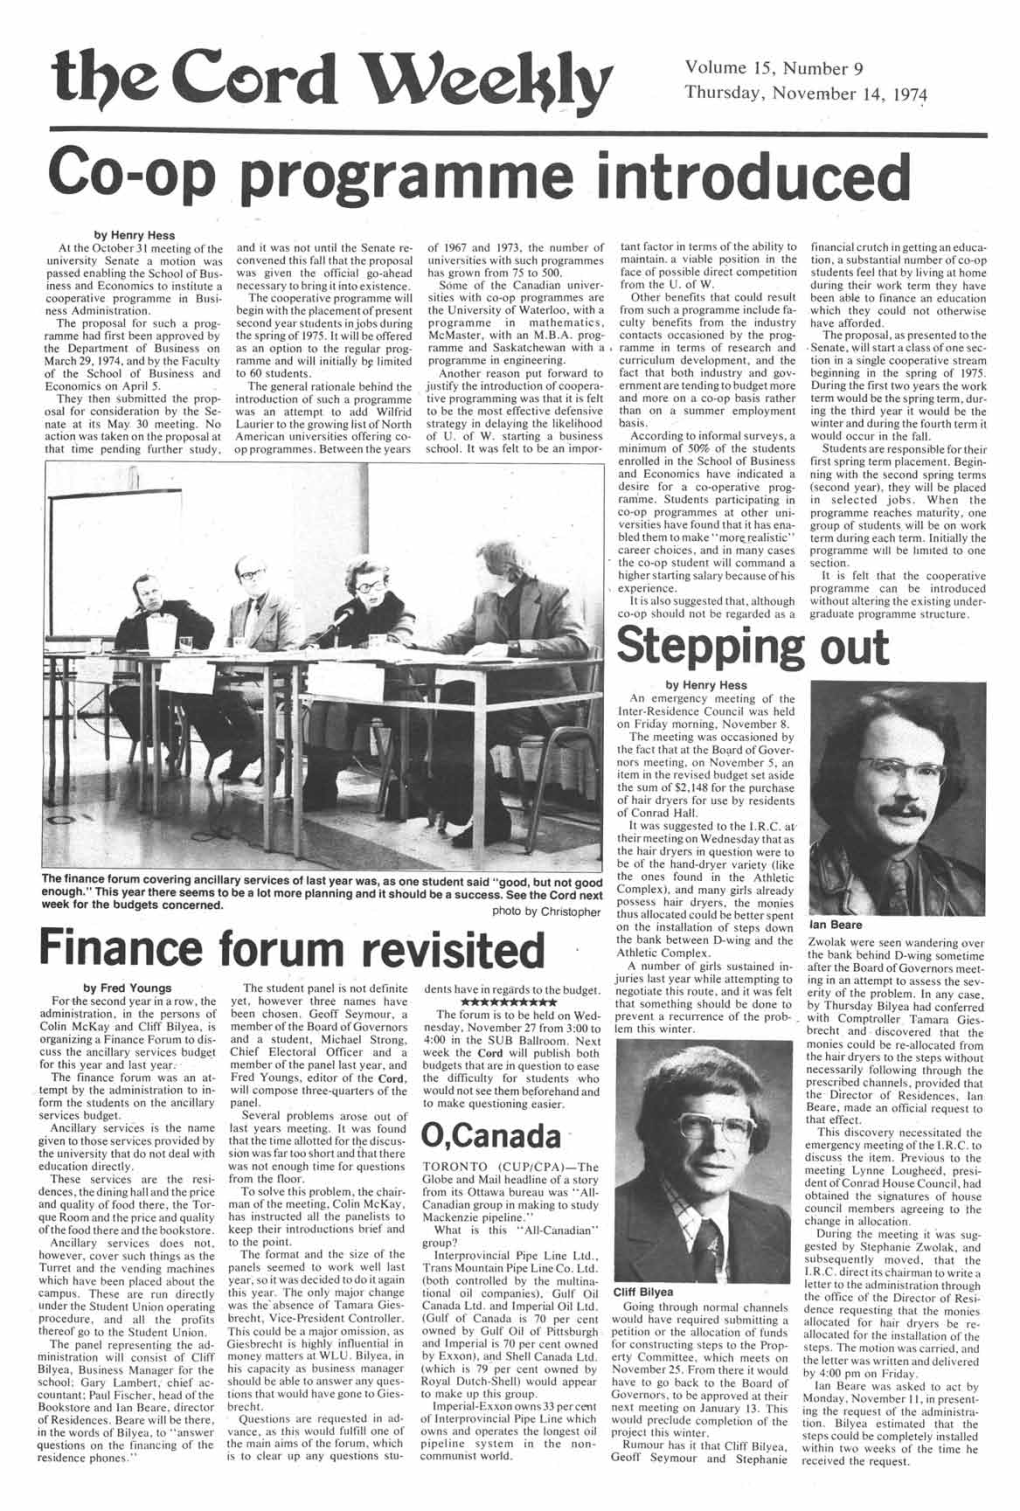 The Cord Weekly Thursday, November 14, 1974 Co-Op Programme Introduced